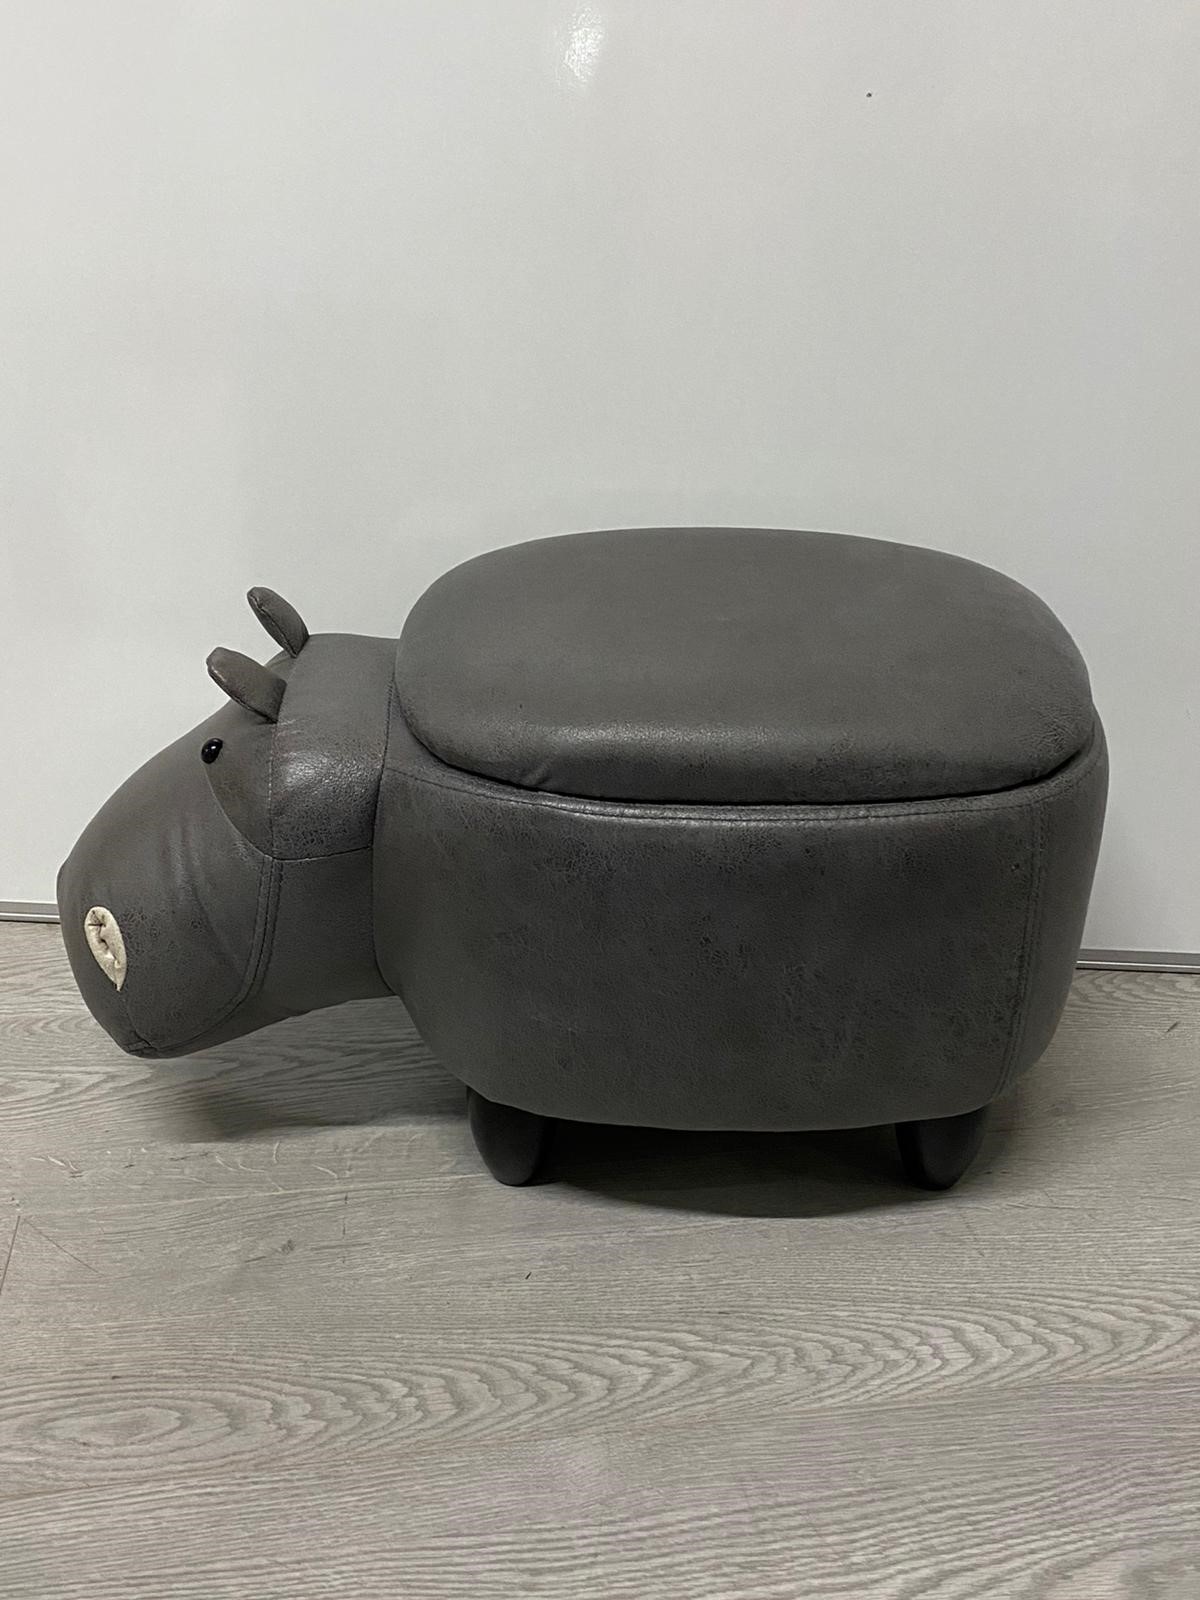 Small Hippo storage stool 34cm in height